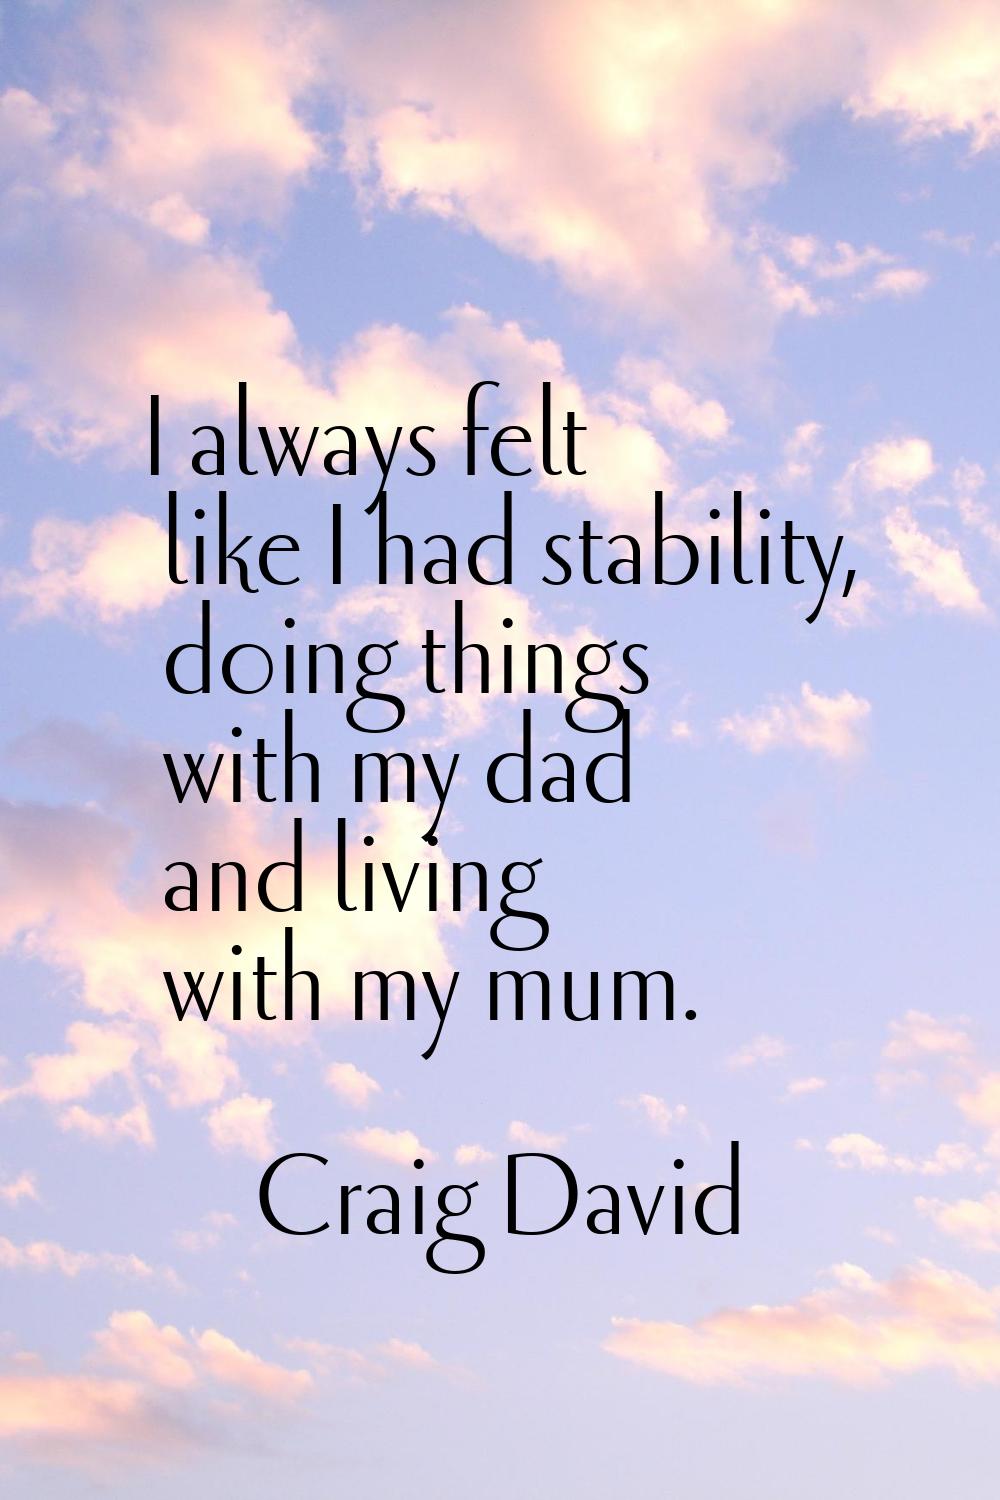 I always felt like I had stability, doing things with my dad and living with my mum.